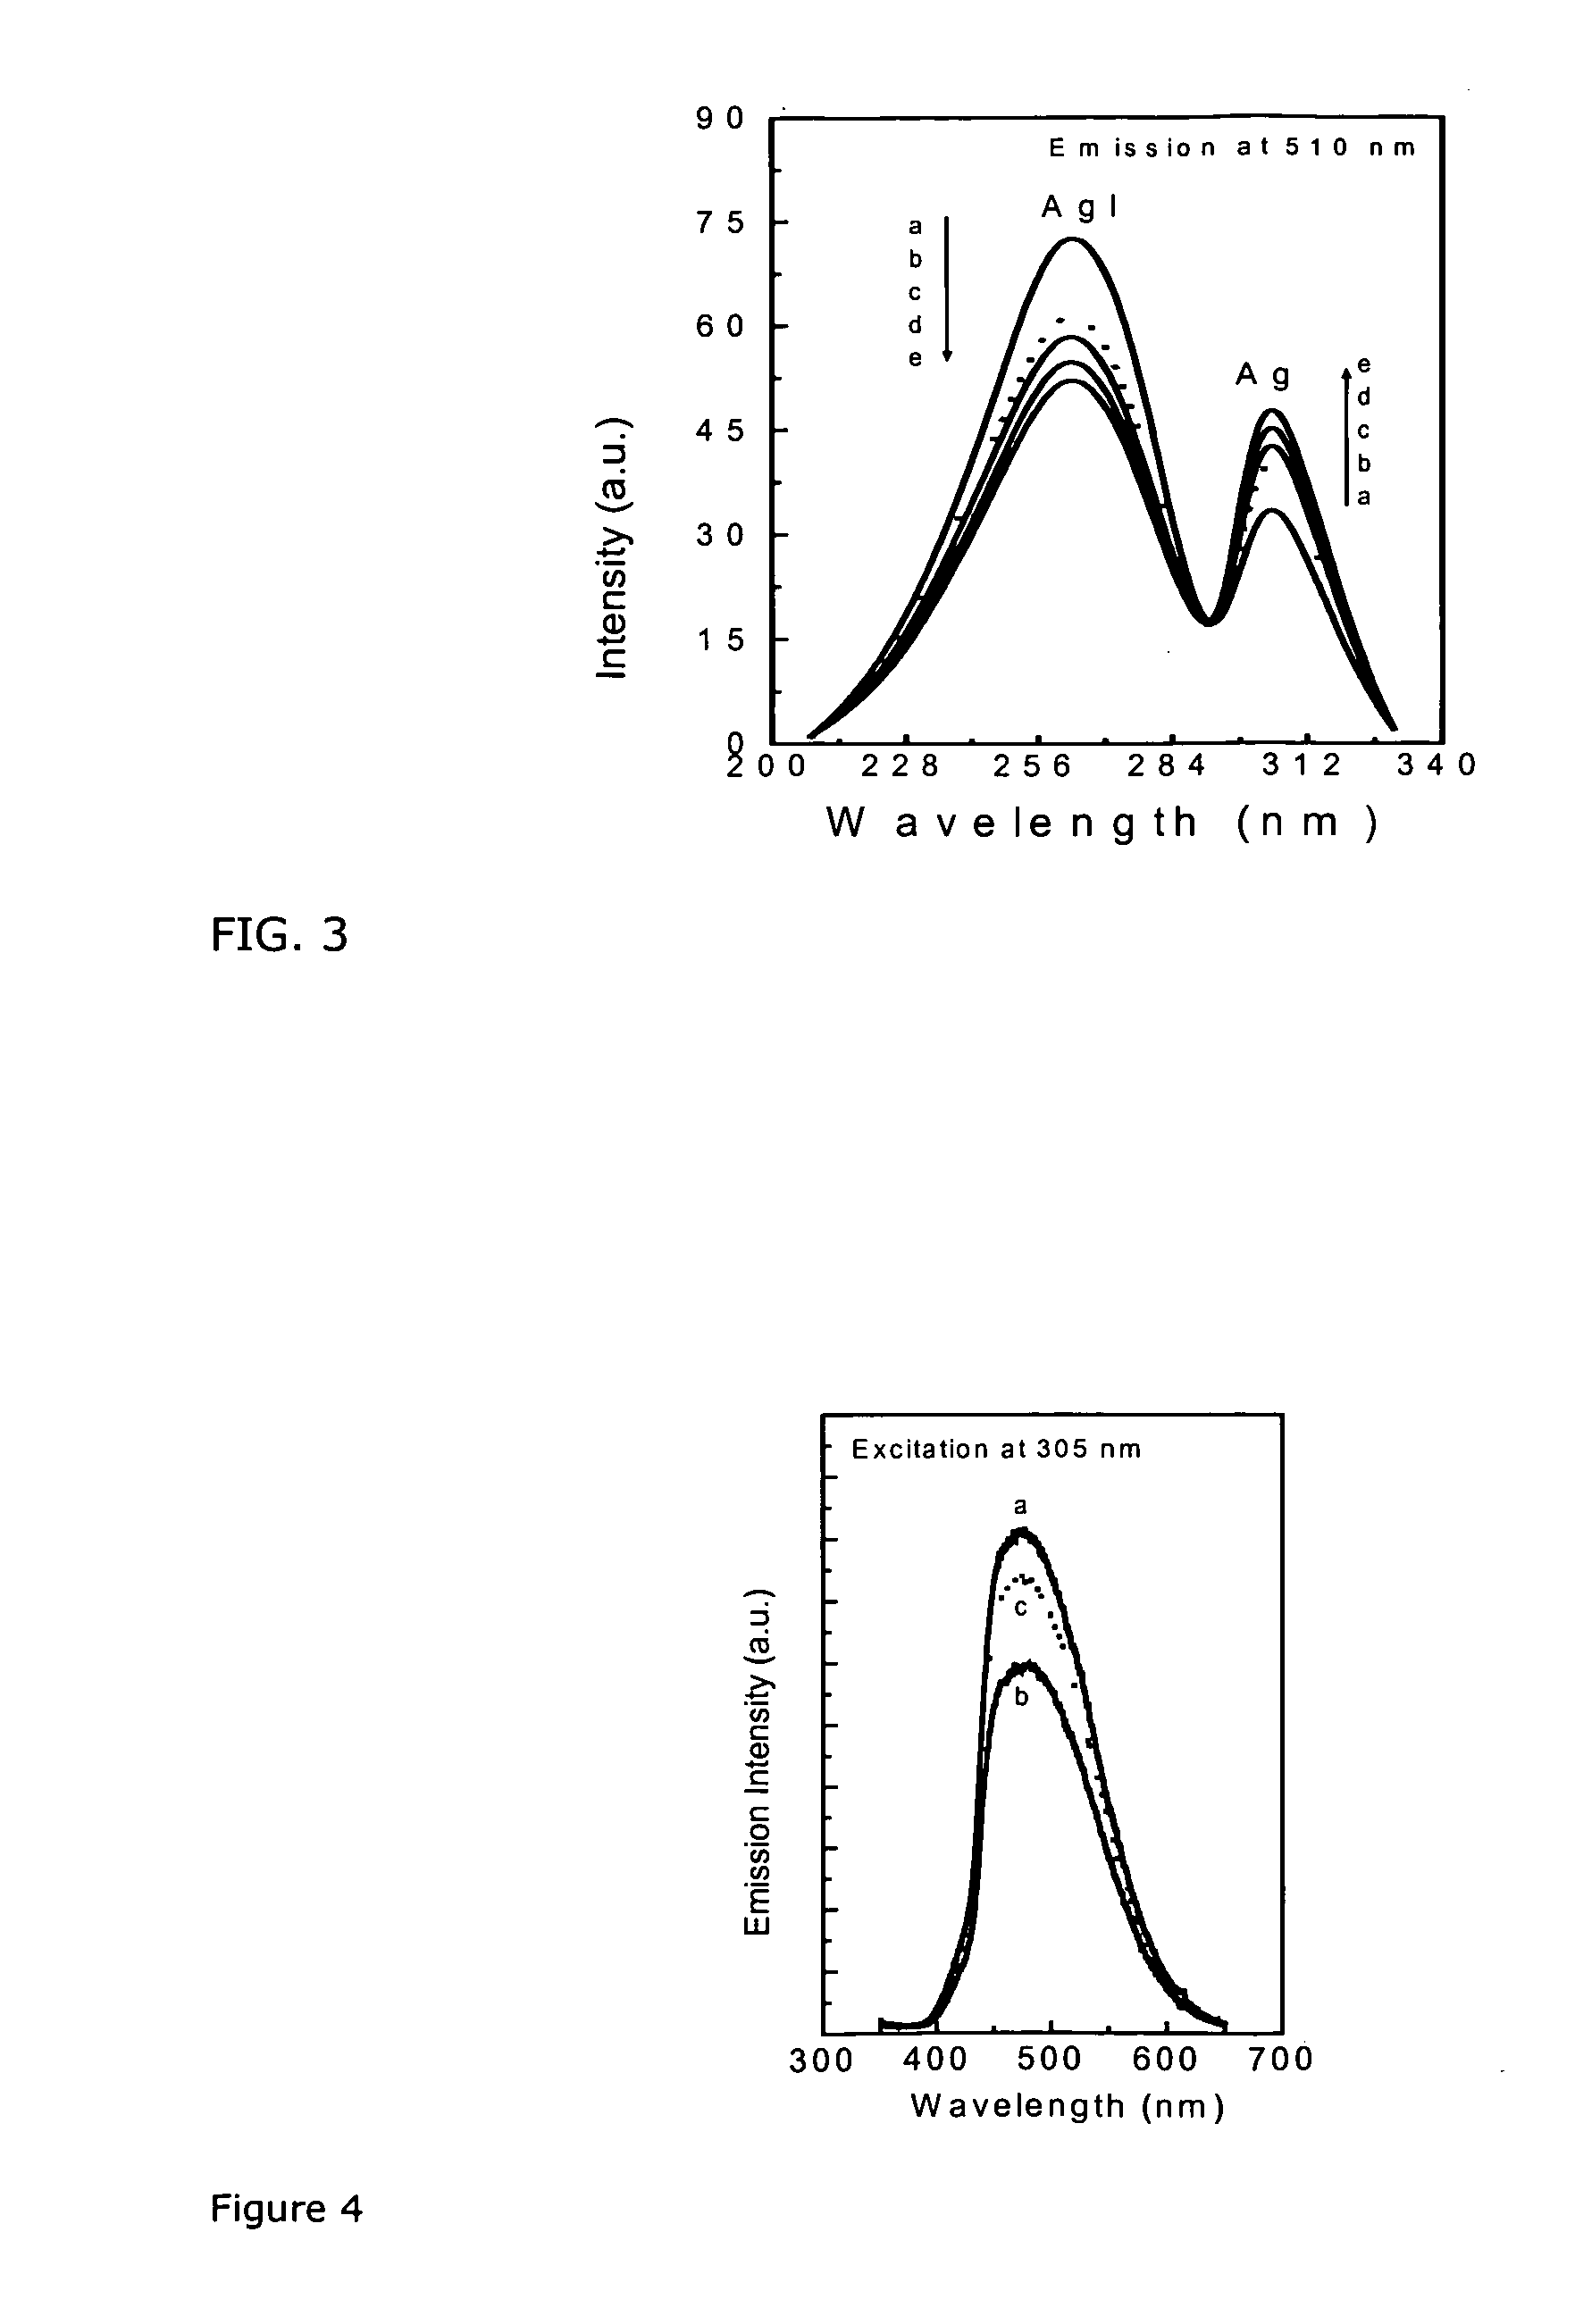 Nanoparticle optical storage apparatus and methods of making and using same